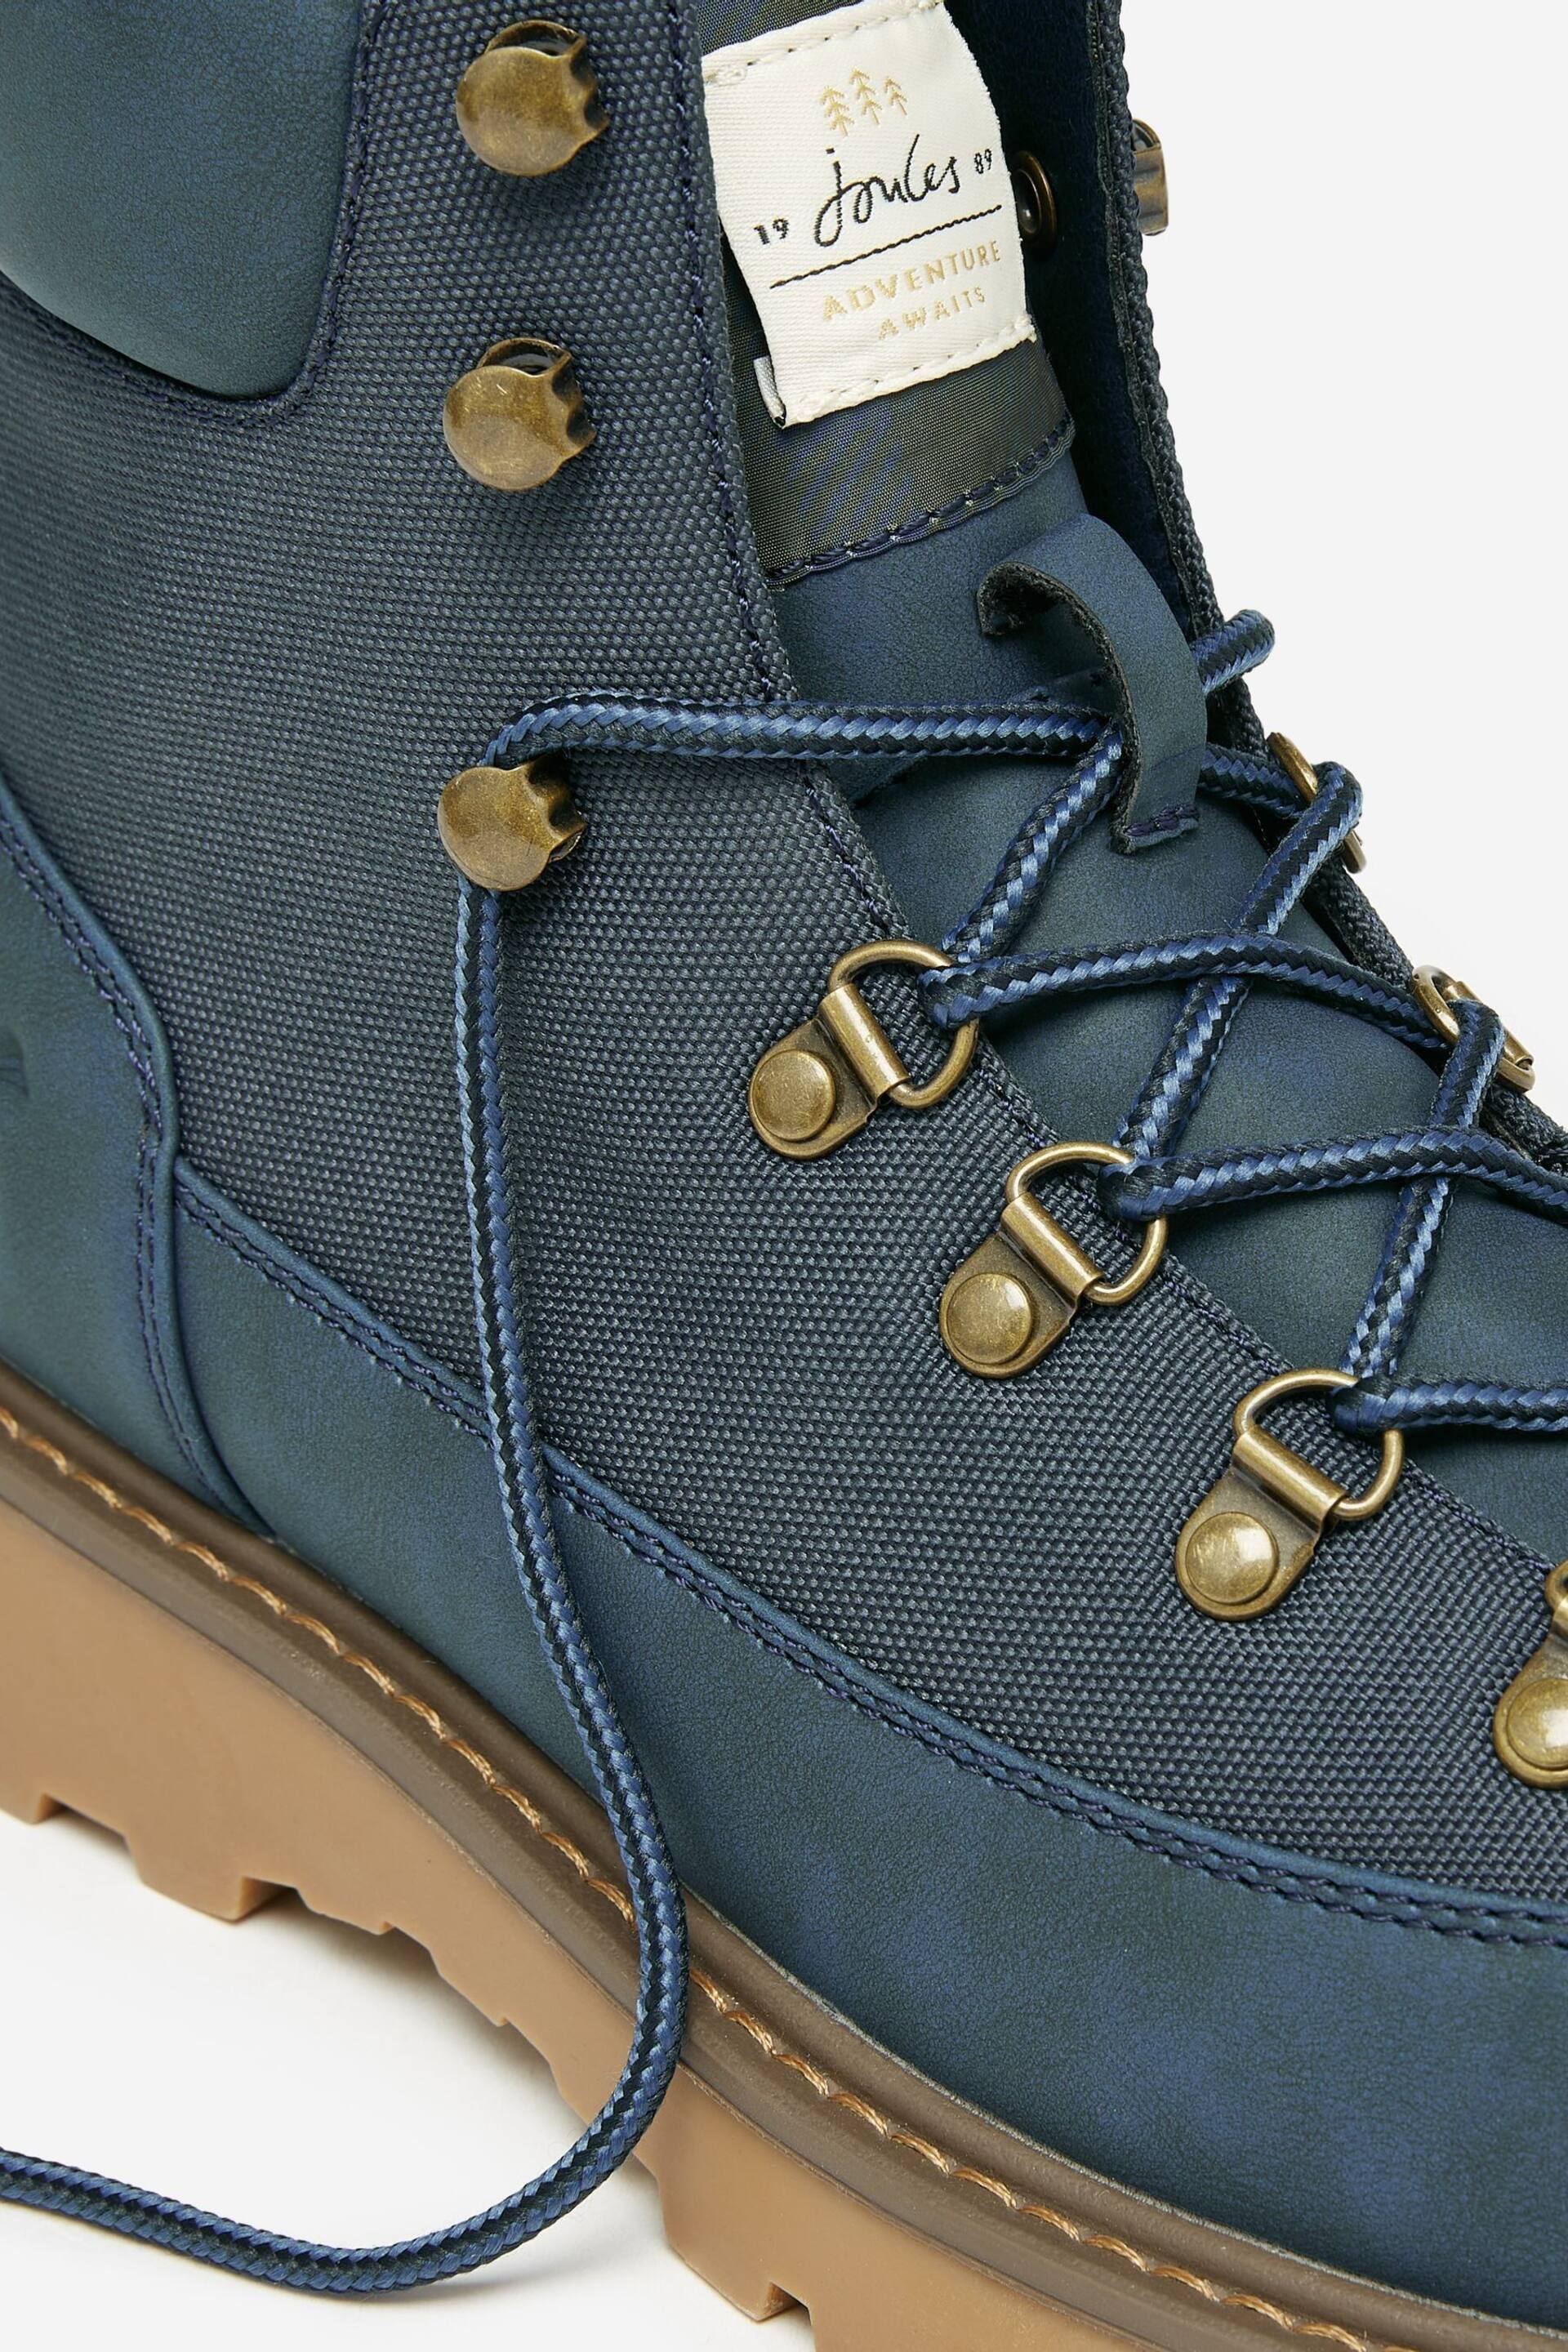 Joules Kendall Navy Lace-Up Boots - Image 7 of 8